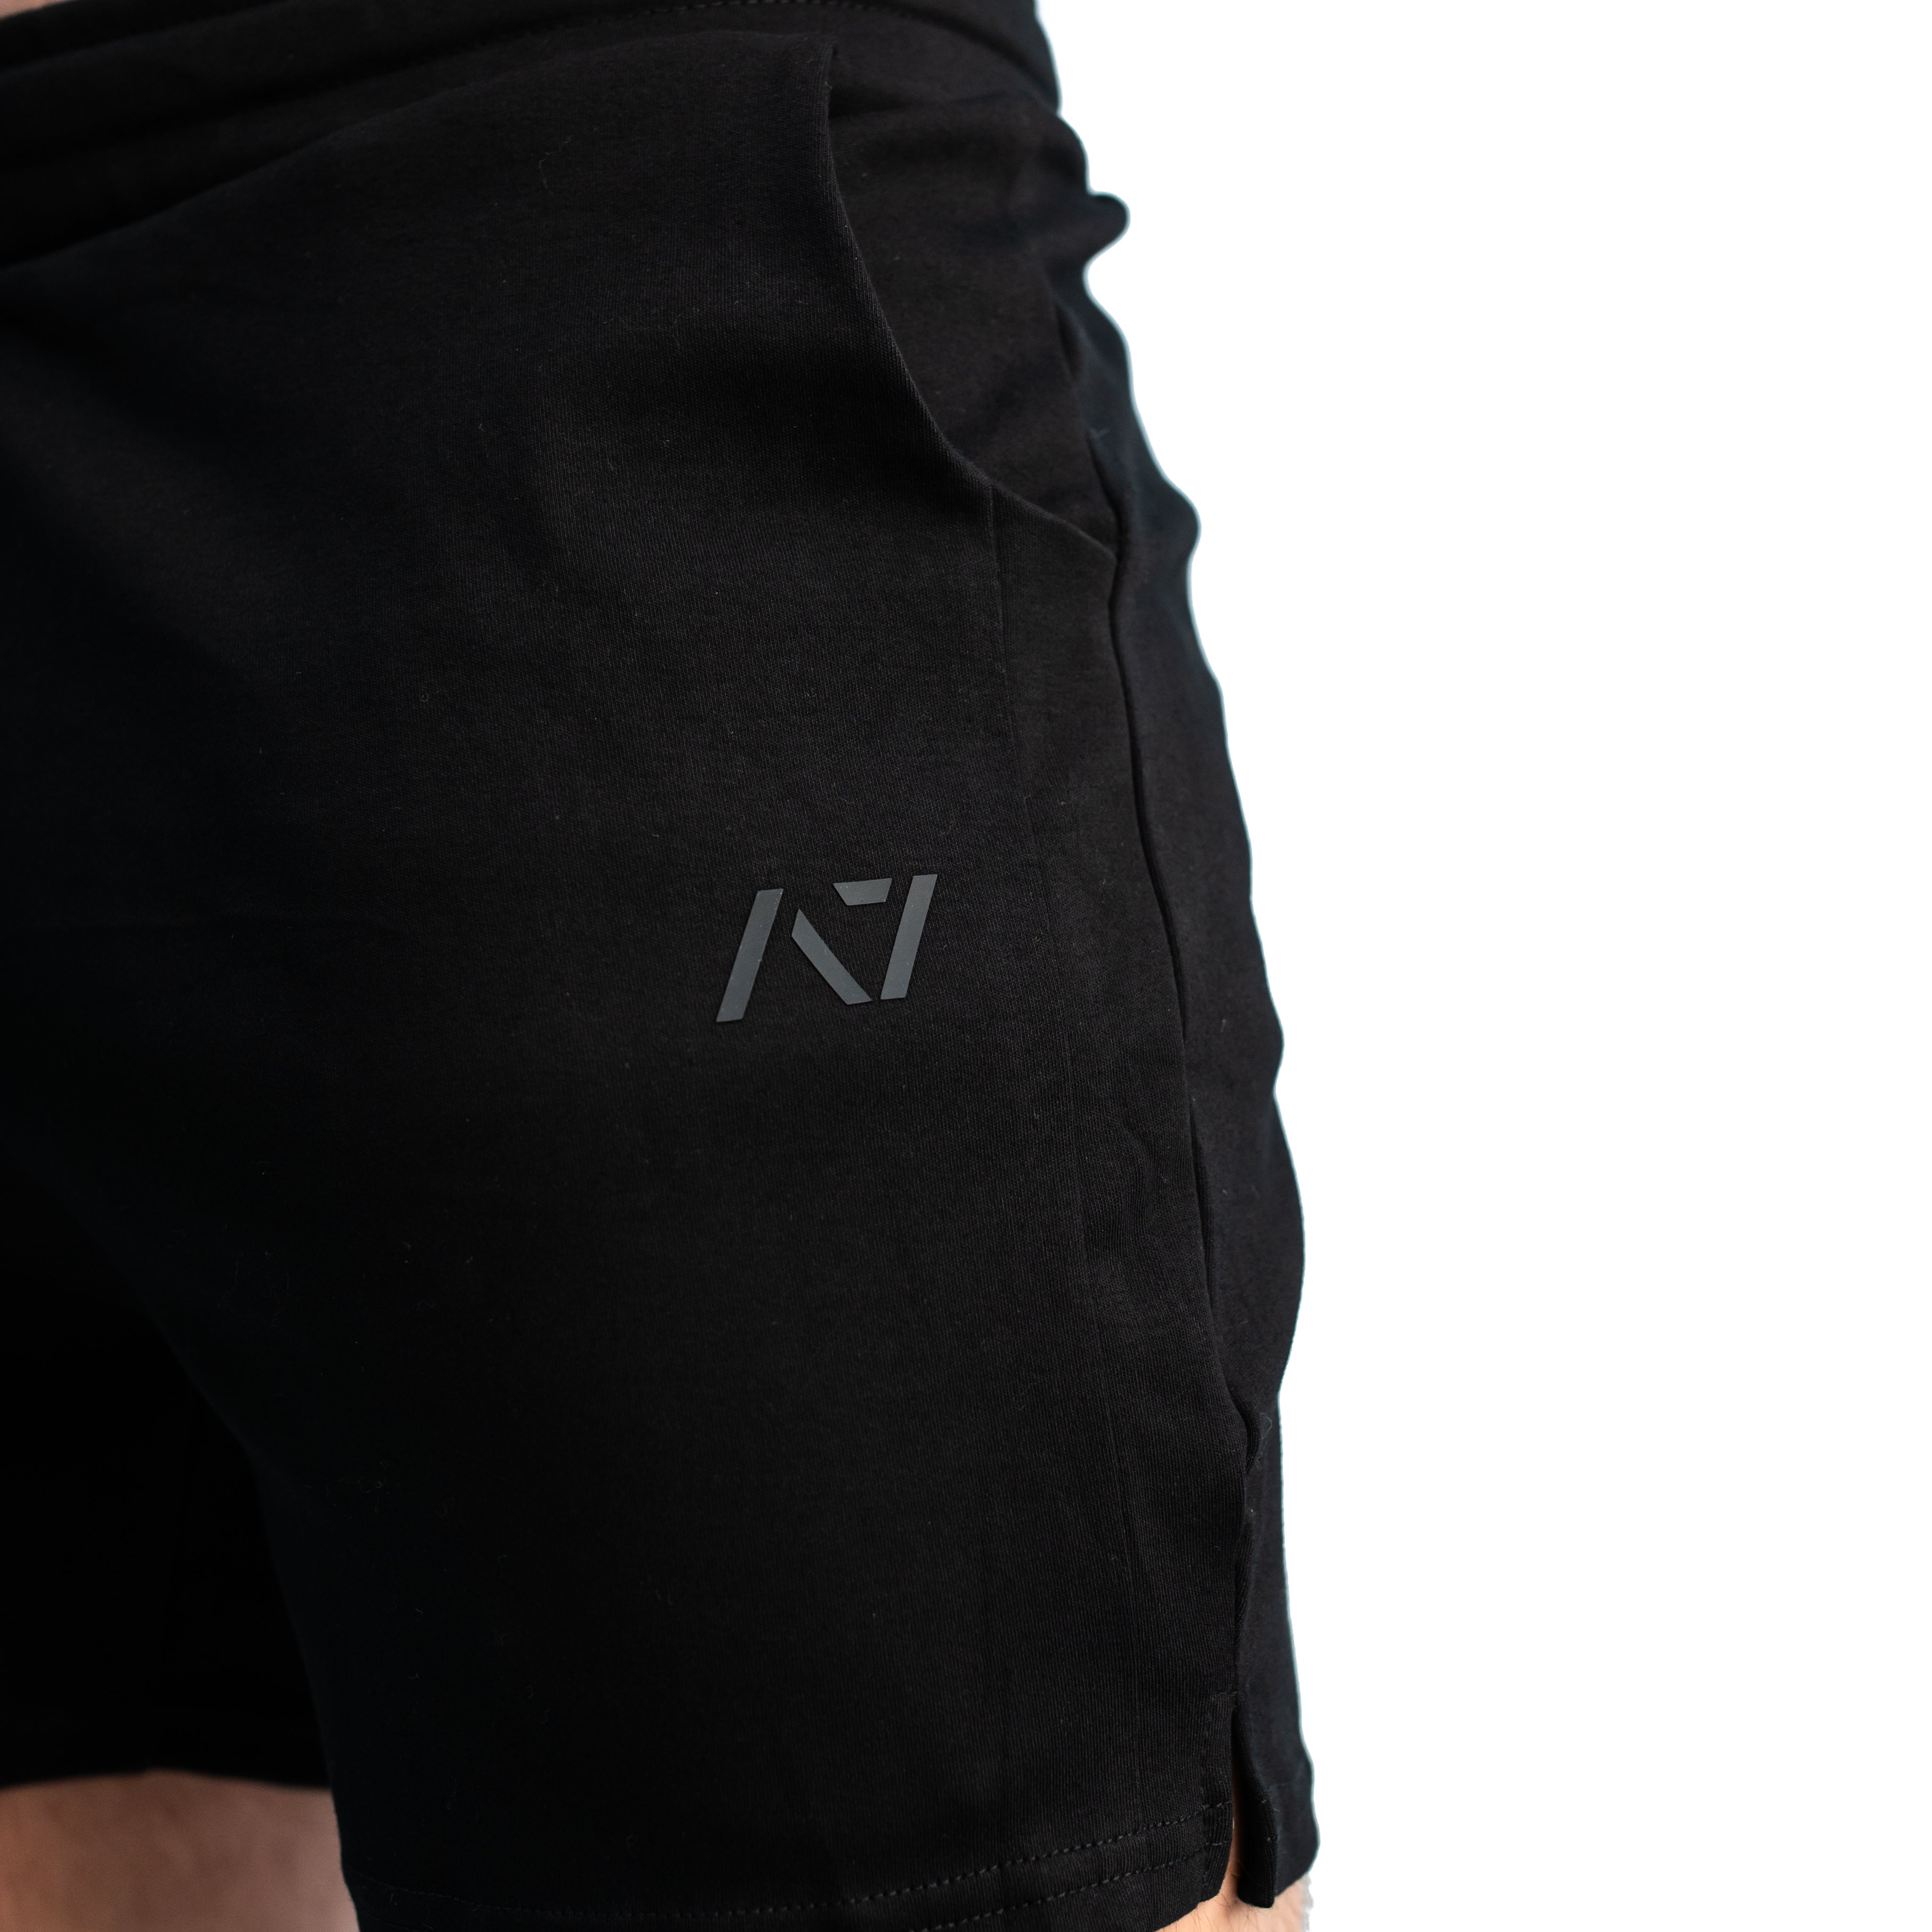 A7 Moxie Shorts are part of the A7 balance collection which combines comfort and aesthetics. The pieces in this collection are made with comfortable fabrics and minimal logos to create a simple, yet impactful look. The Moxie Shorts have 4-way hybrid stretch material to move with your unique shape. Purchase A7 Moxie Shorts from A7 Europe. Purchase A7 Moxie shorts from A7 UK. Available in UK and Europe including France, Italy, Germany, the Netherlands, Sweden and Poland.